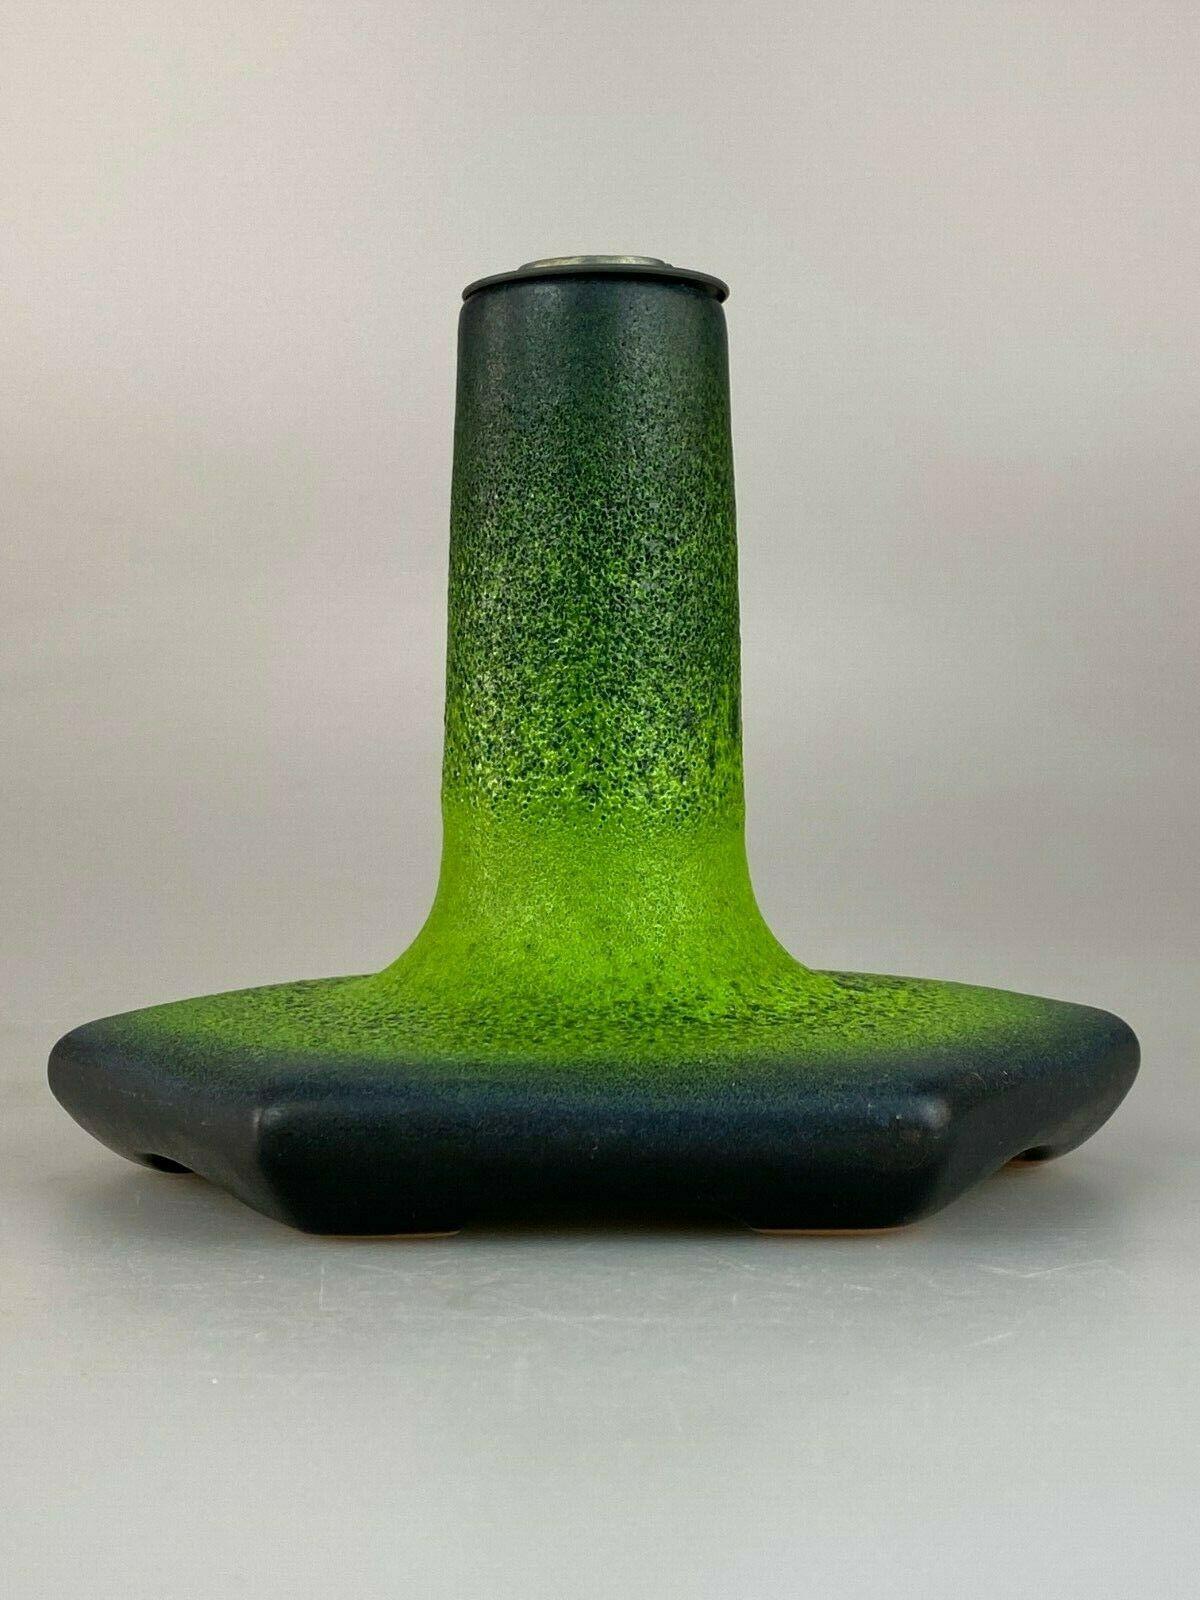 60s 70s lamp light wall lamp ceramic mid century space age 60s 70s

Object: wall lamp

Manufacturer:

Condition: good

Age: around 1960-1970

Dimensions:

Diameter = 18.5cm
Height = 14.5cm

Other notes:

The pictures serve as part